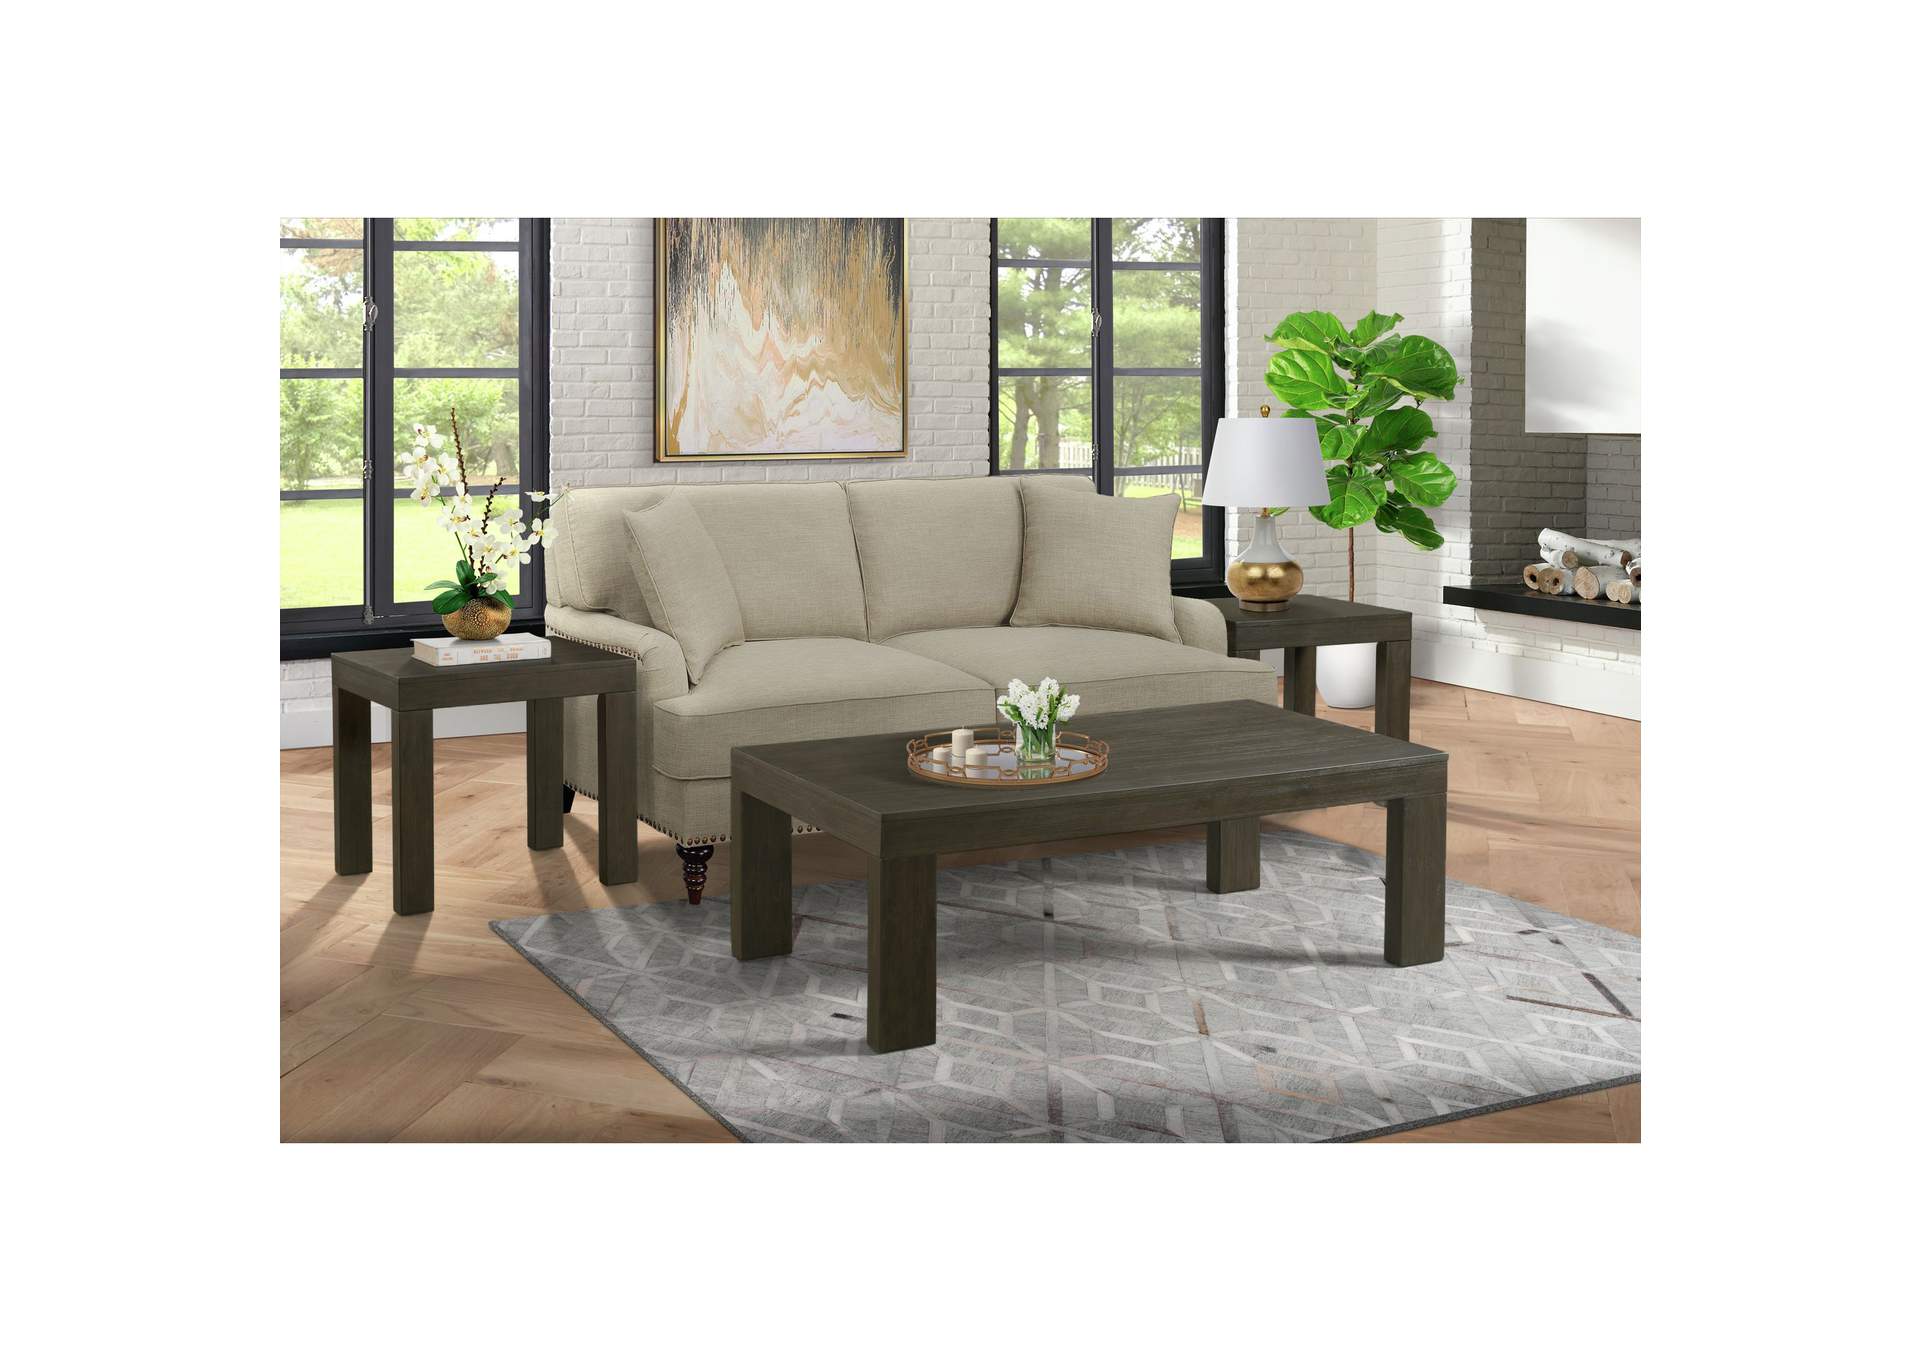 Grady End Table With Power,Elements